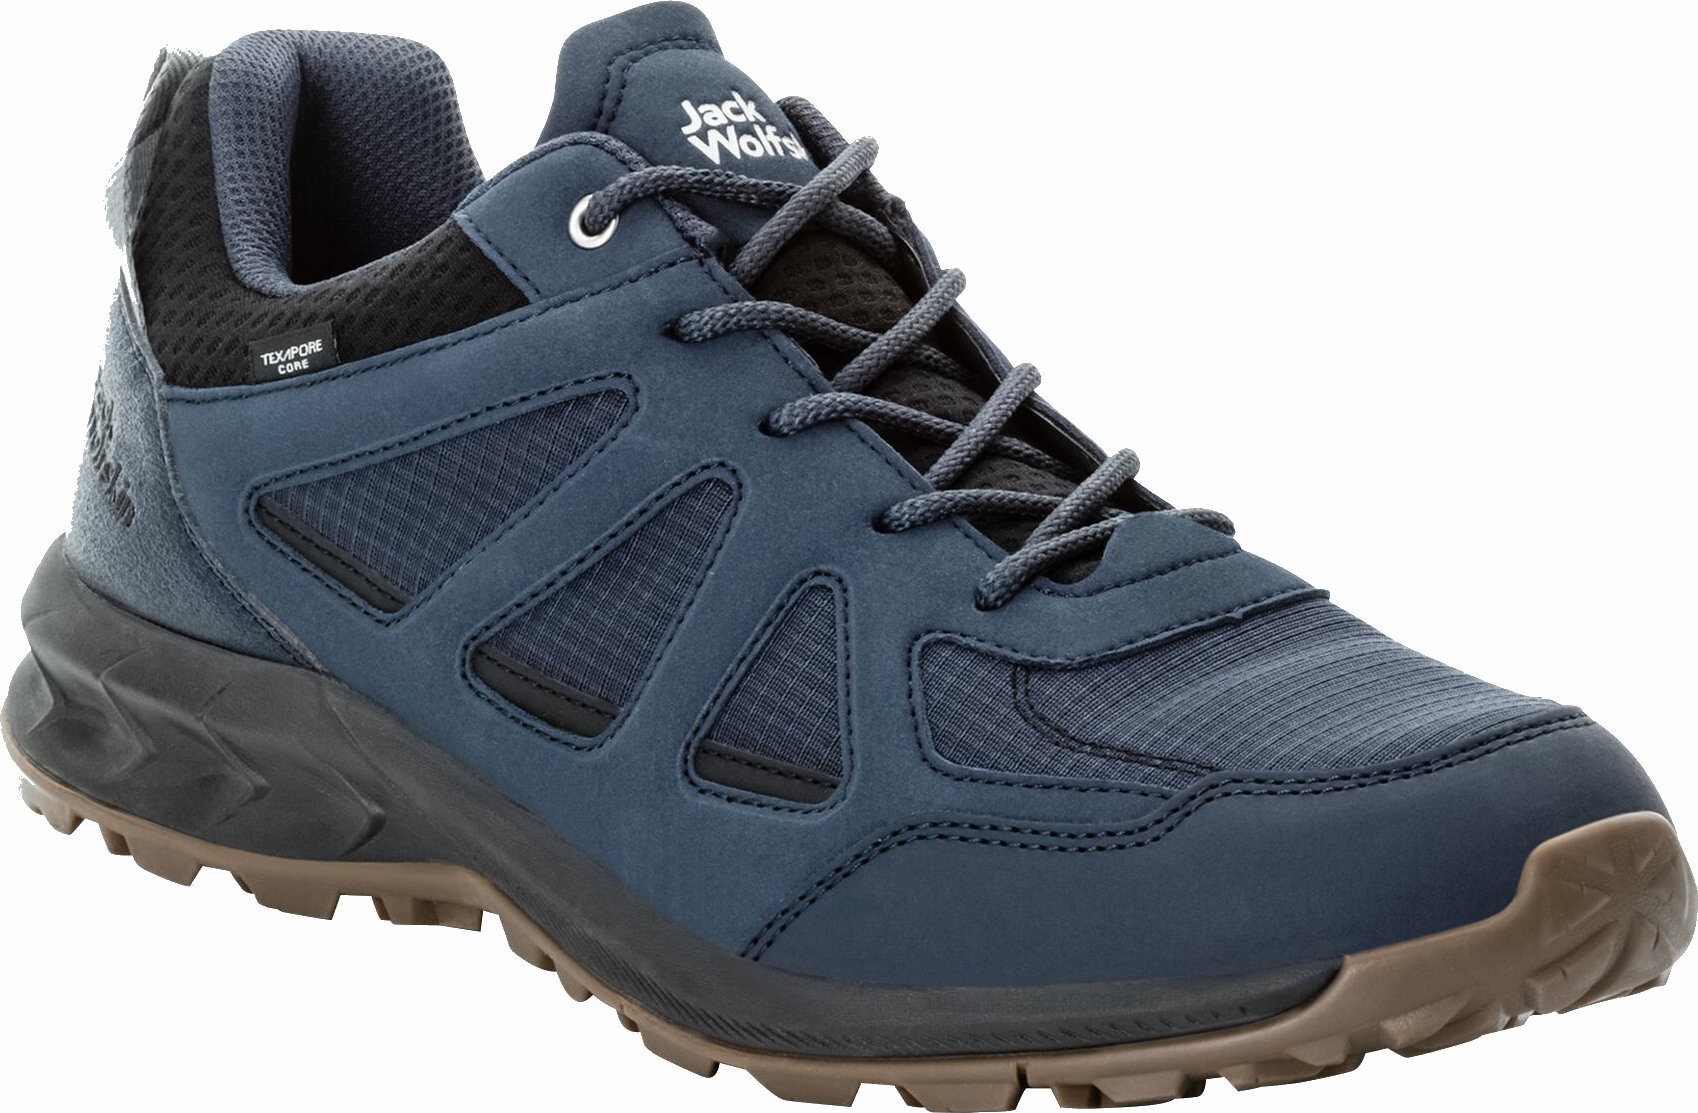 Chaussures outdoor hommes Jack Wolfskin Woodland 2 Texapore Low M Night Blue 44,5 Chaussures outdoor hommes